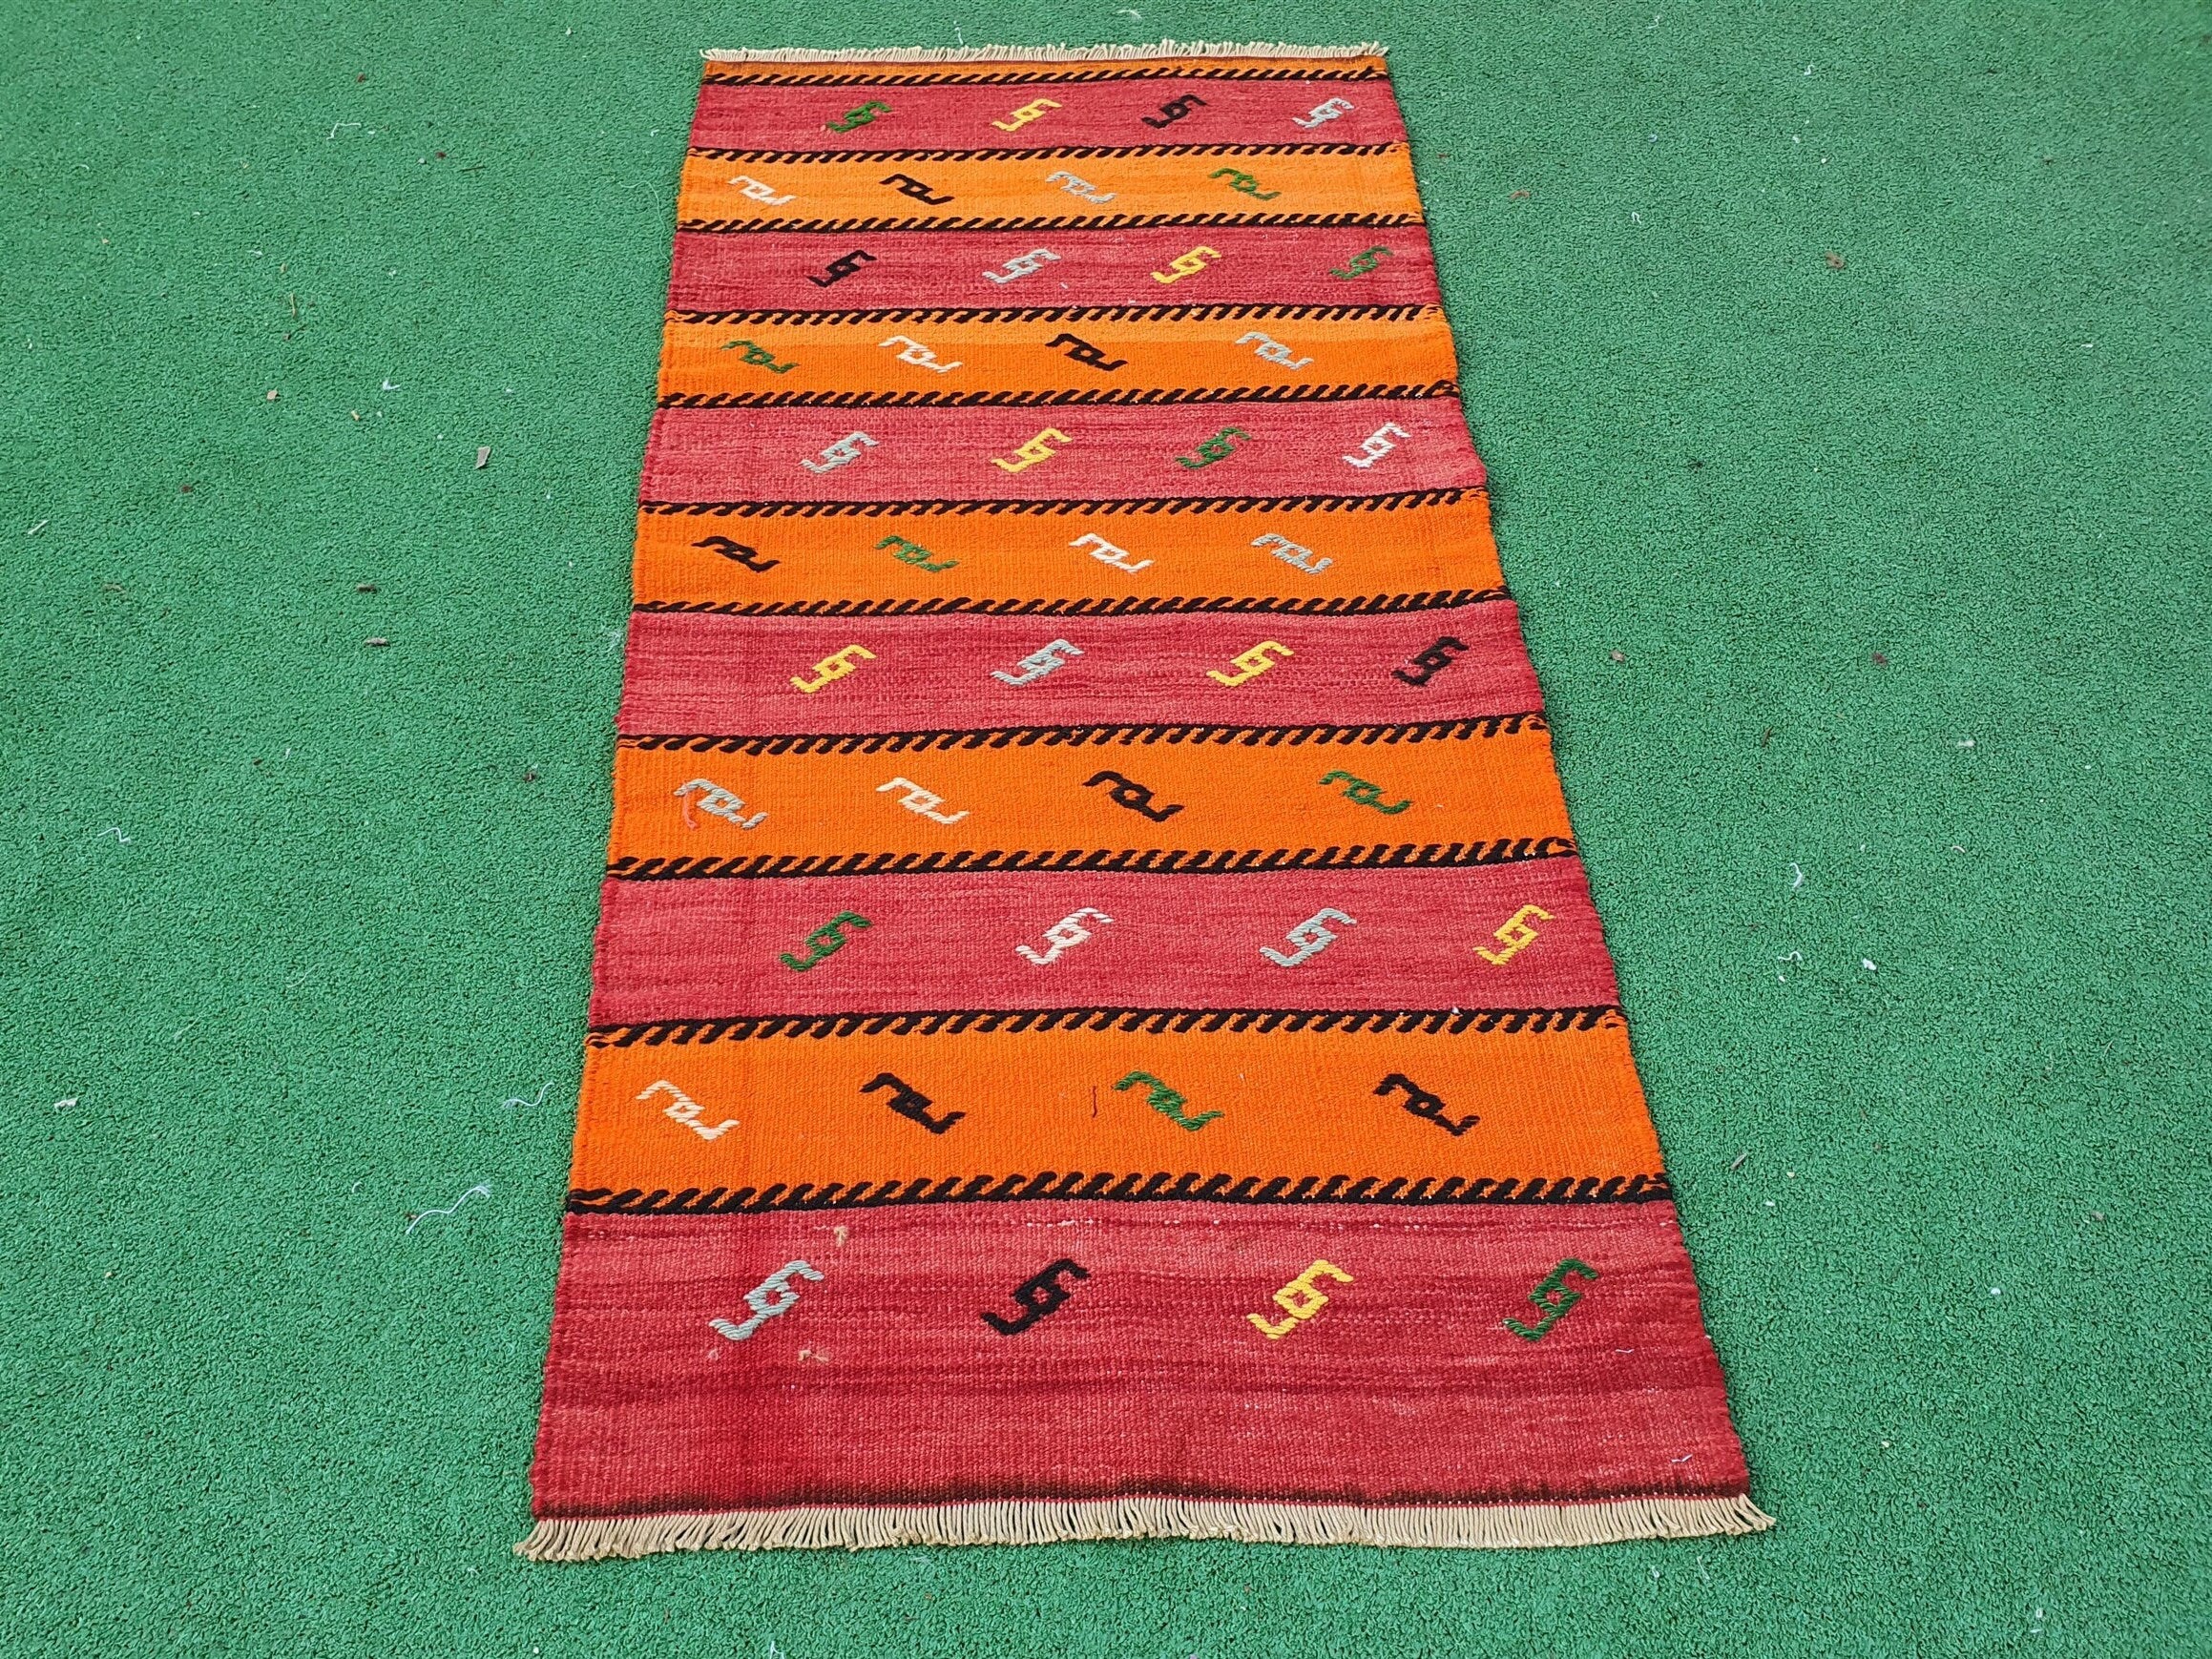 Turkish Kilim Rug, 4 ft 3 in x 2 ft Small Orange and Brown Striped Cicim Embroidered Kilim